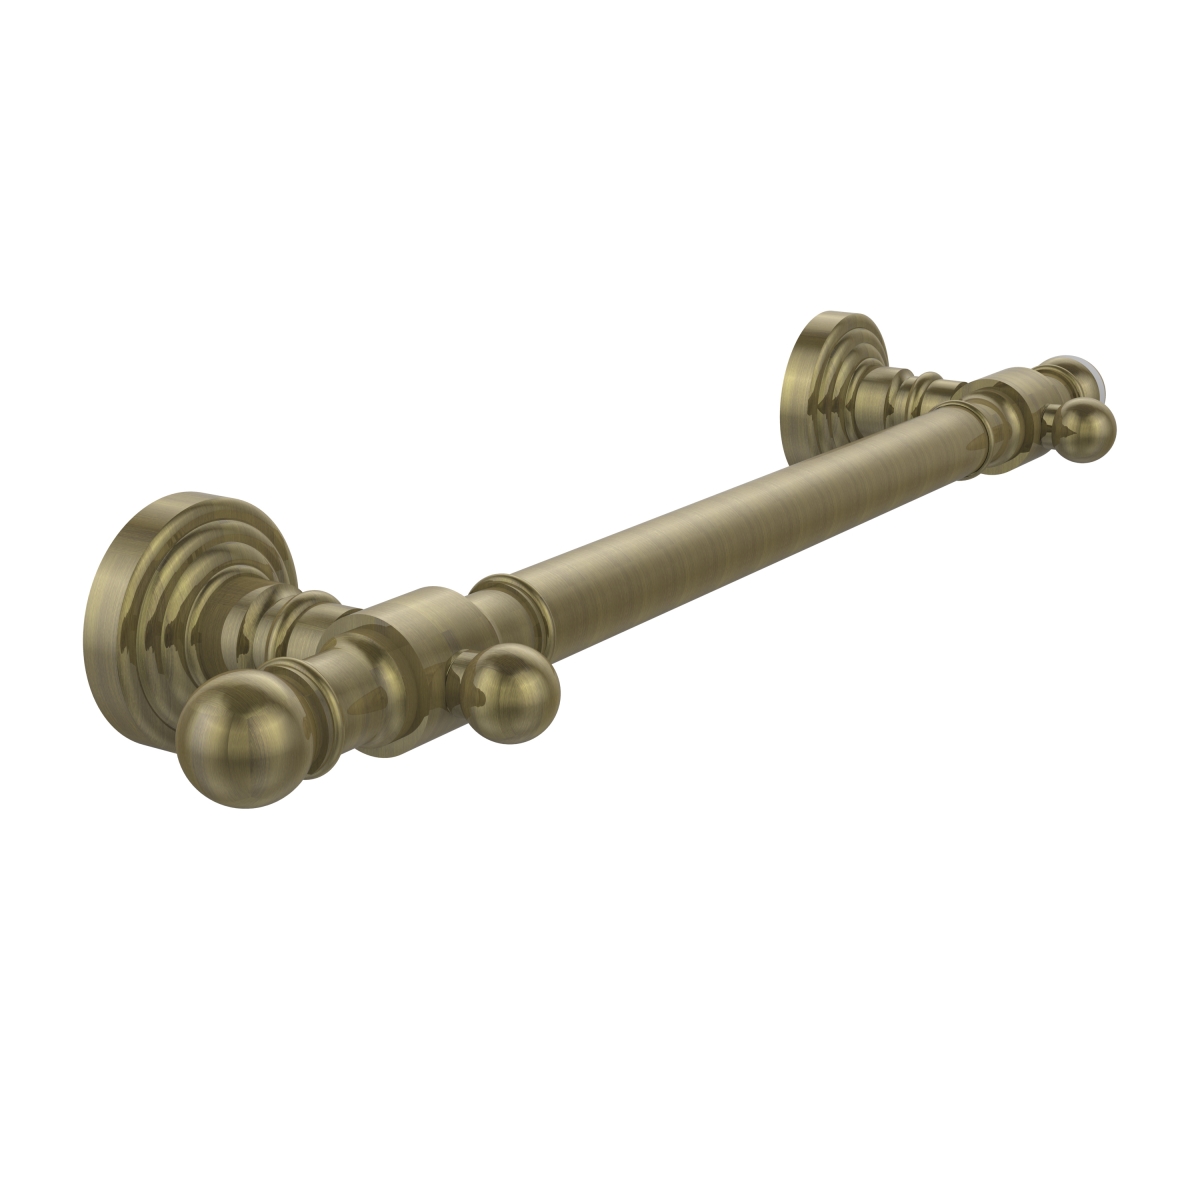 Picture of Allied Brass WP-GRS-16-ABR 16 in. Grab Bar Smooth, Antique Brass - 3.5 x 22 x 16 in.